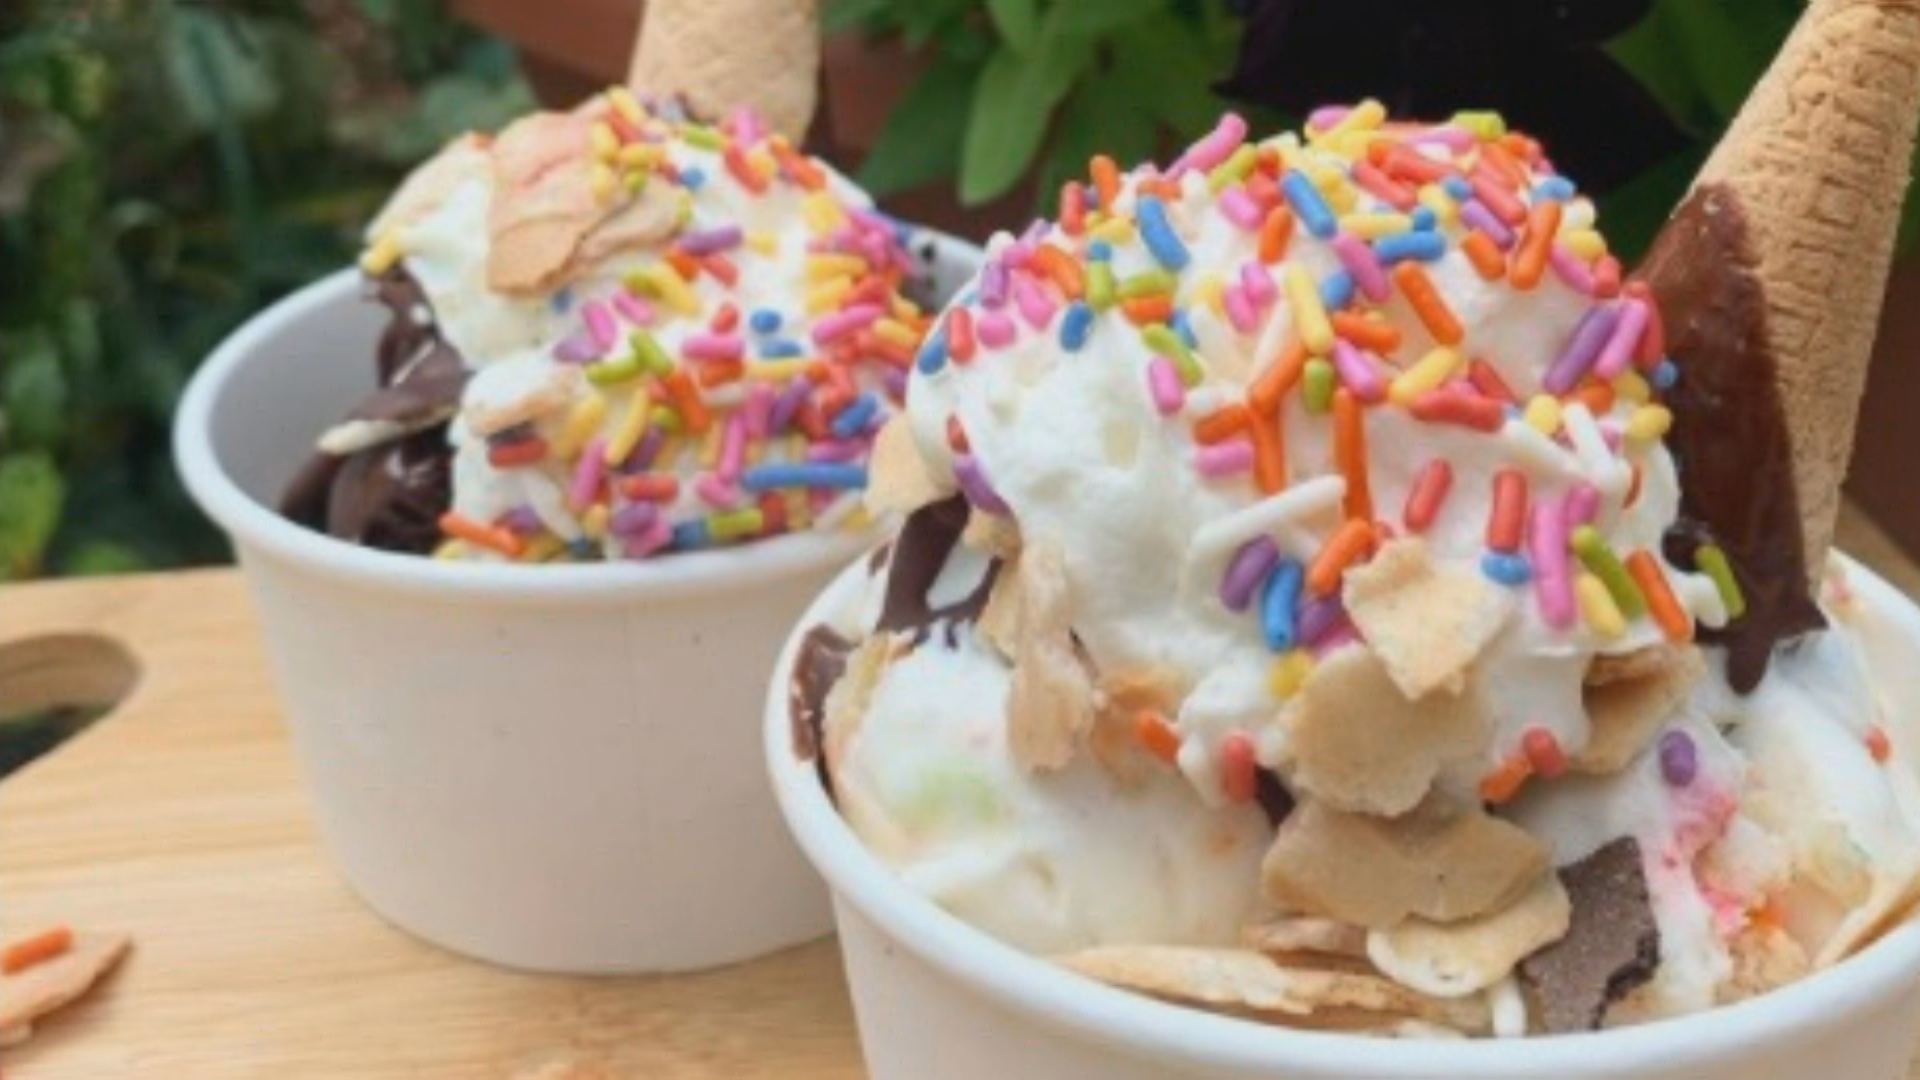 Zsa’s Ice Cream In Mount Airy Putting A Unique Spin On Classic Ice Cream Flavors With Locally Sourced Ingredients